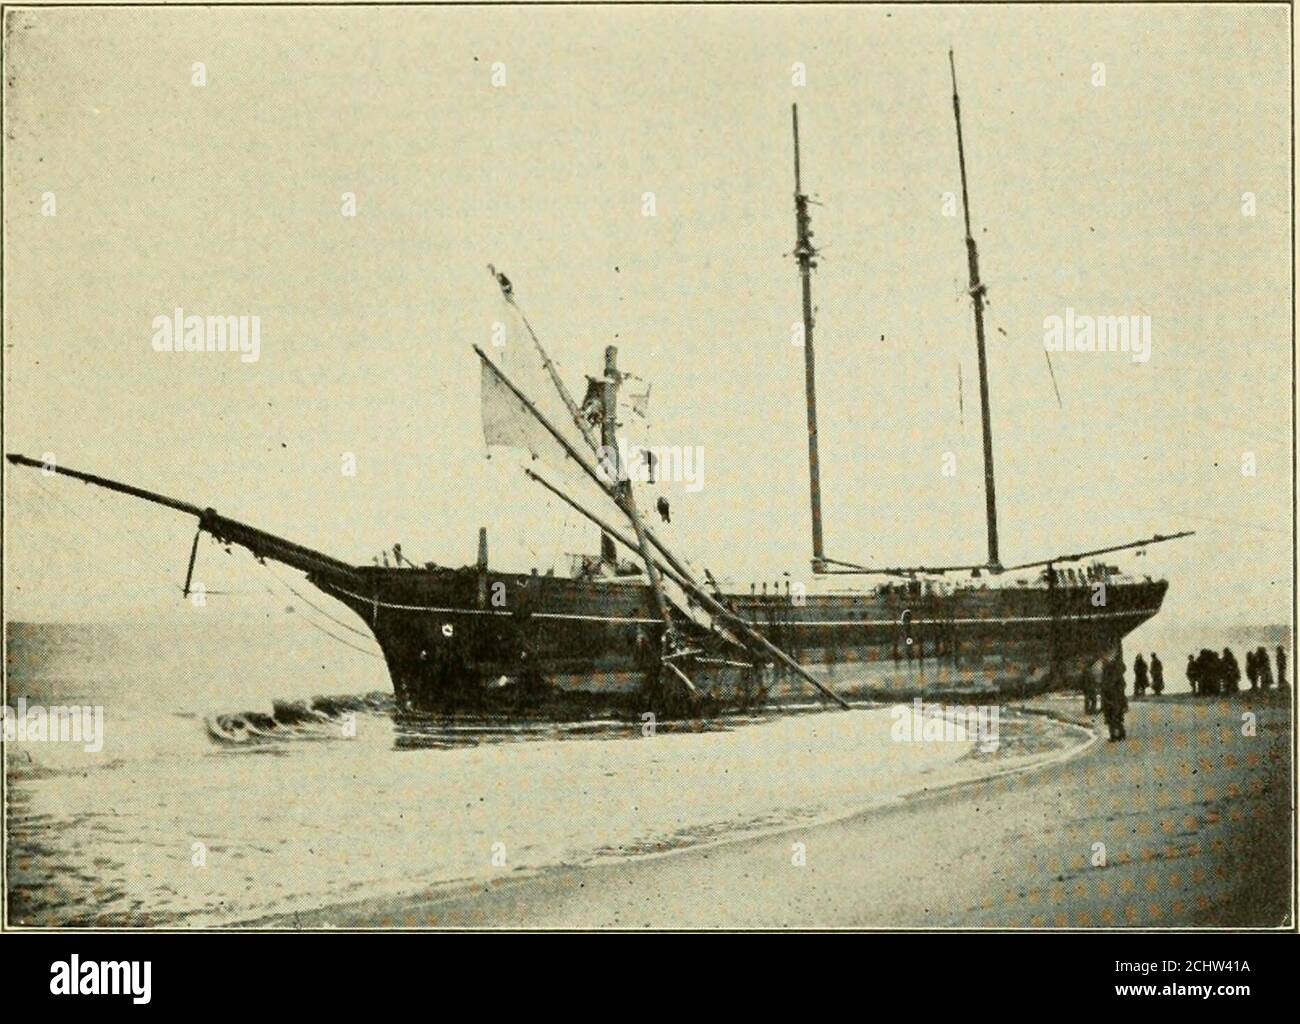 Shipwreck unearthed on Nantucket shore likely a 100-year-old schooner